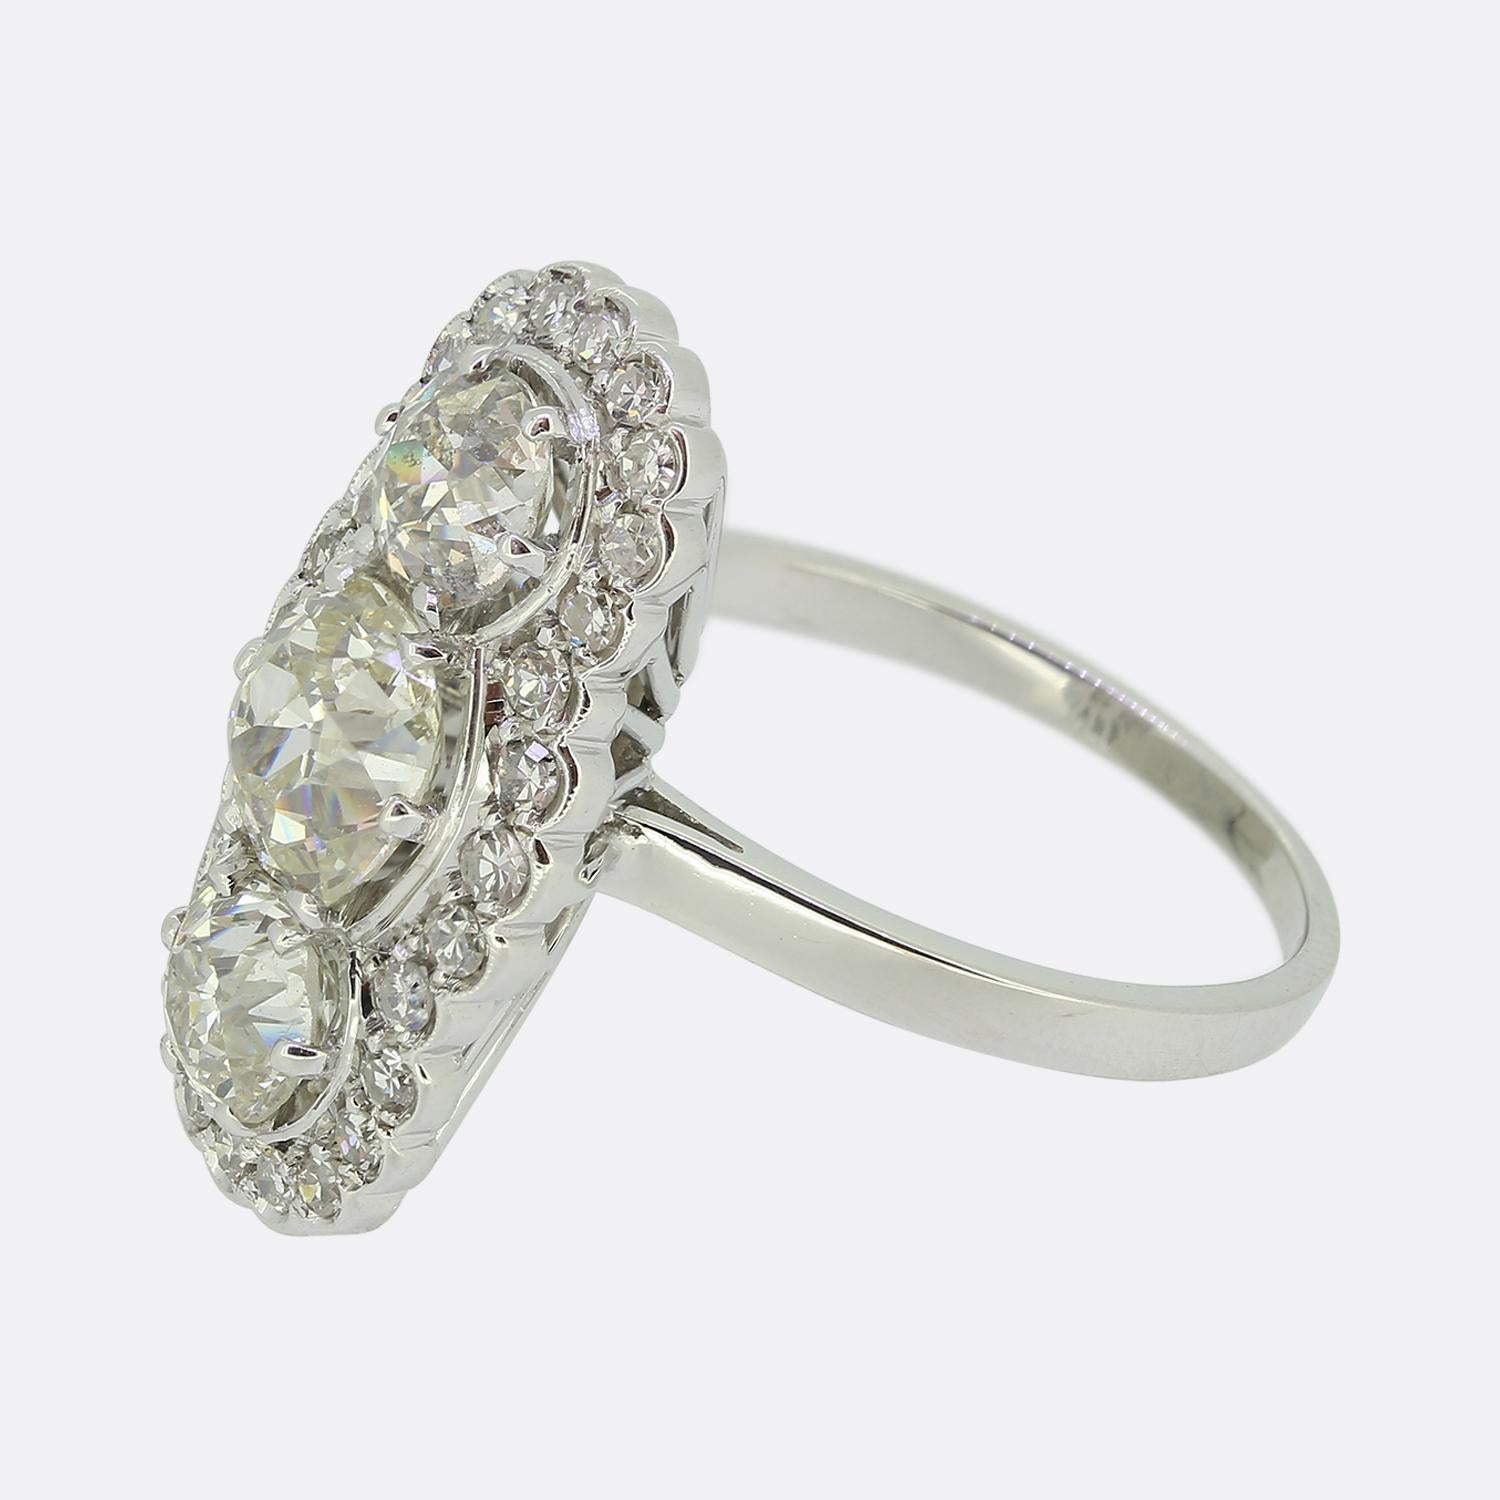 Here we have a fabulous three-stone diamond cluster ring from the Edwardian era. This antique piece has been crafted from 18ct white gold and features an impressive trio of chunky round faceted old cut diamonds; the largest of which has been set at